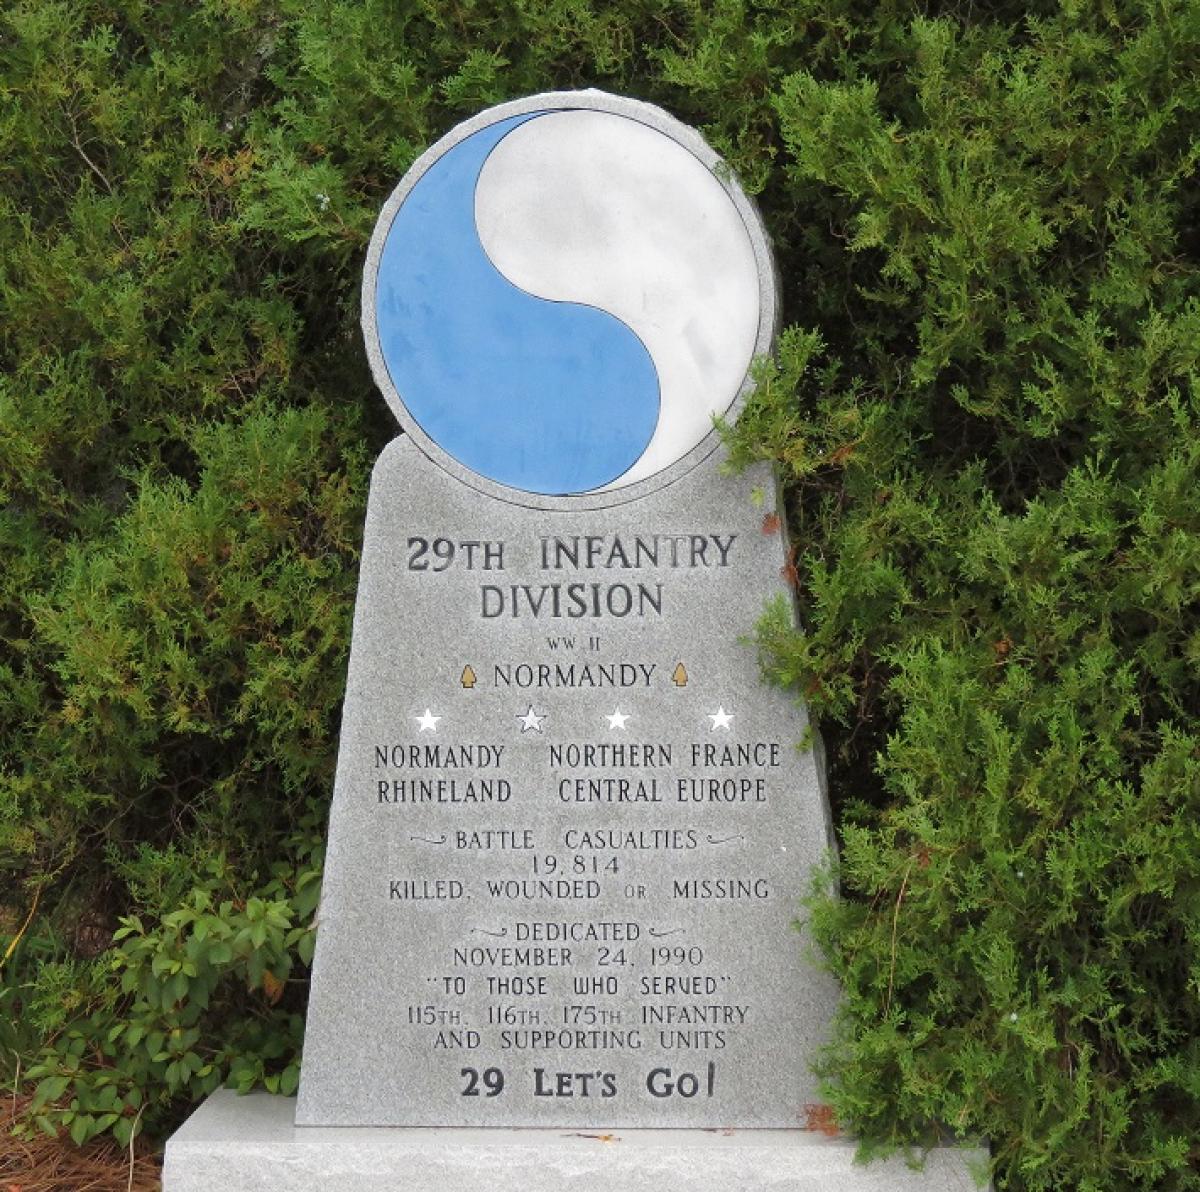 OK, Grove, Headstone Symbols and Meanings, U. S. Army 29th Infantry Division (Blue and Gray)